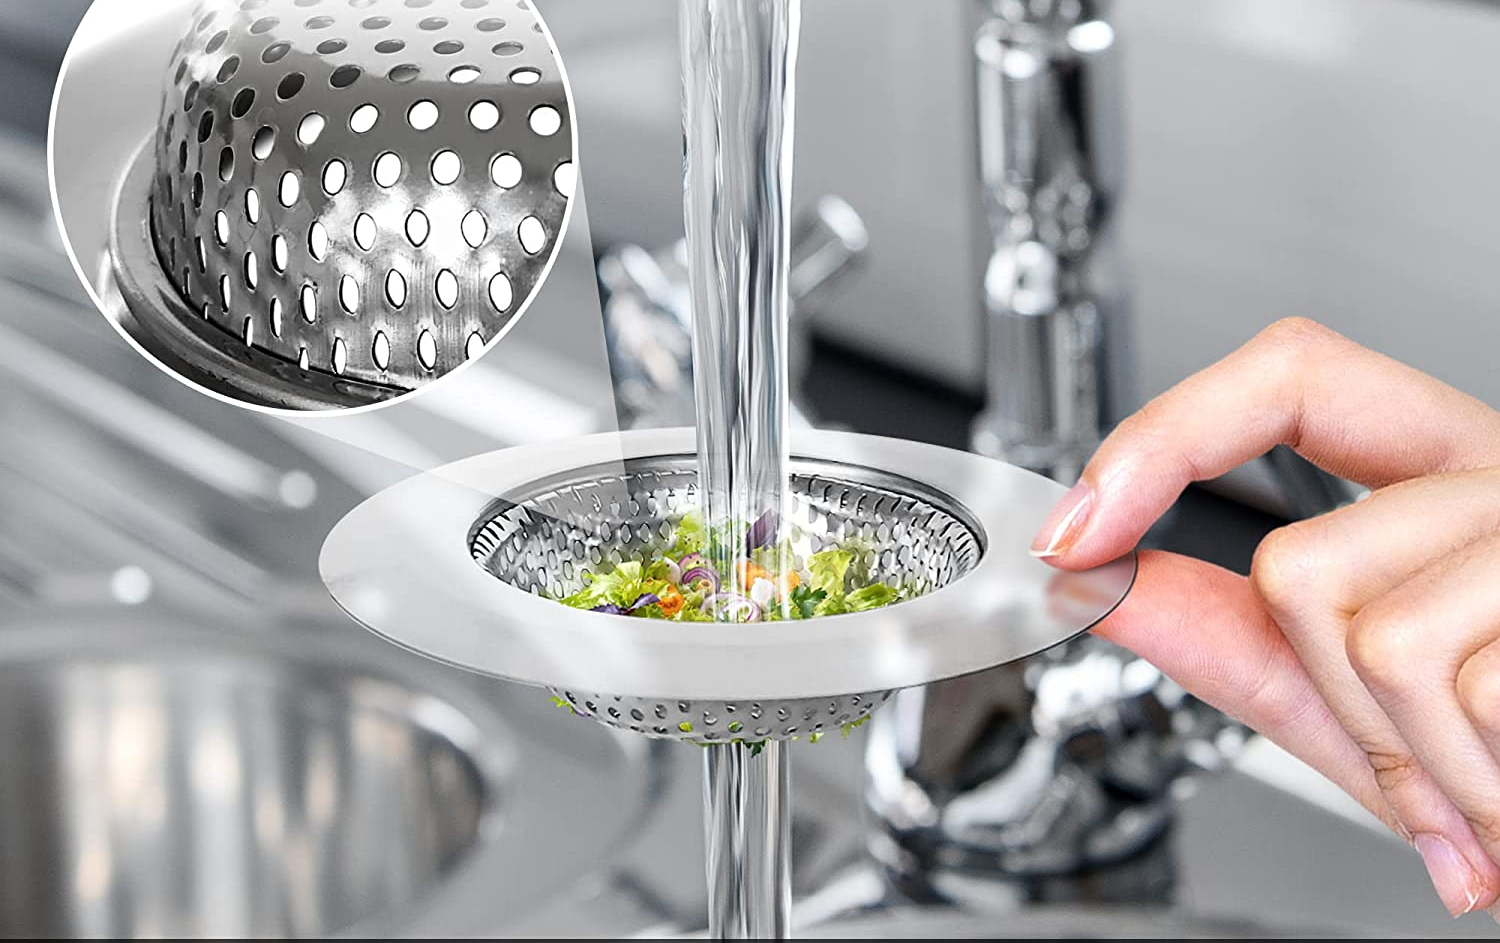 person holding a sink strainer